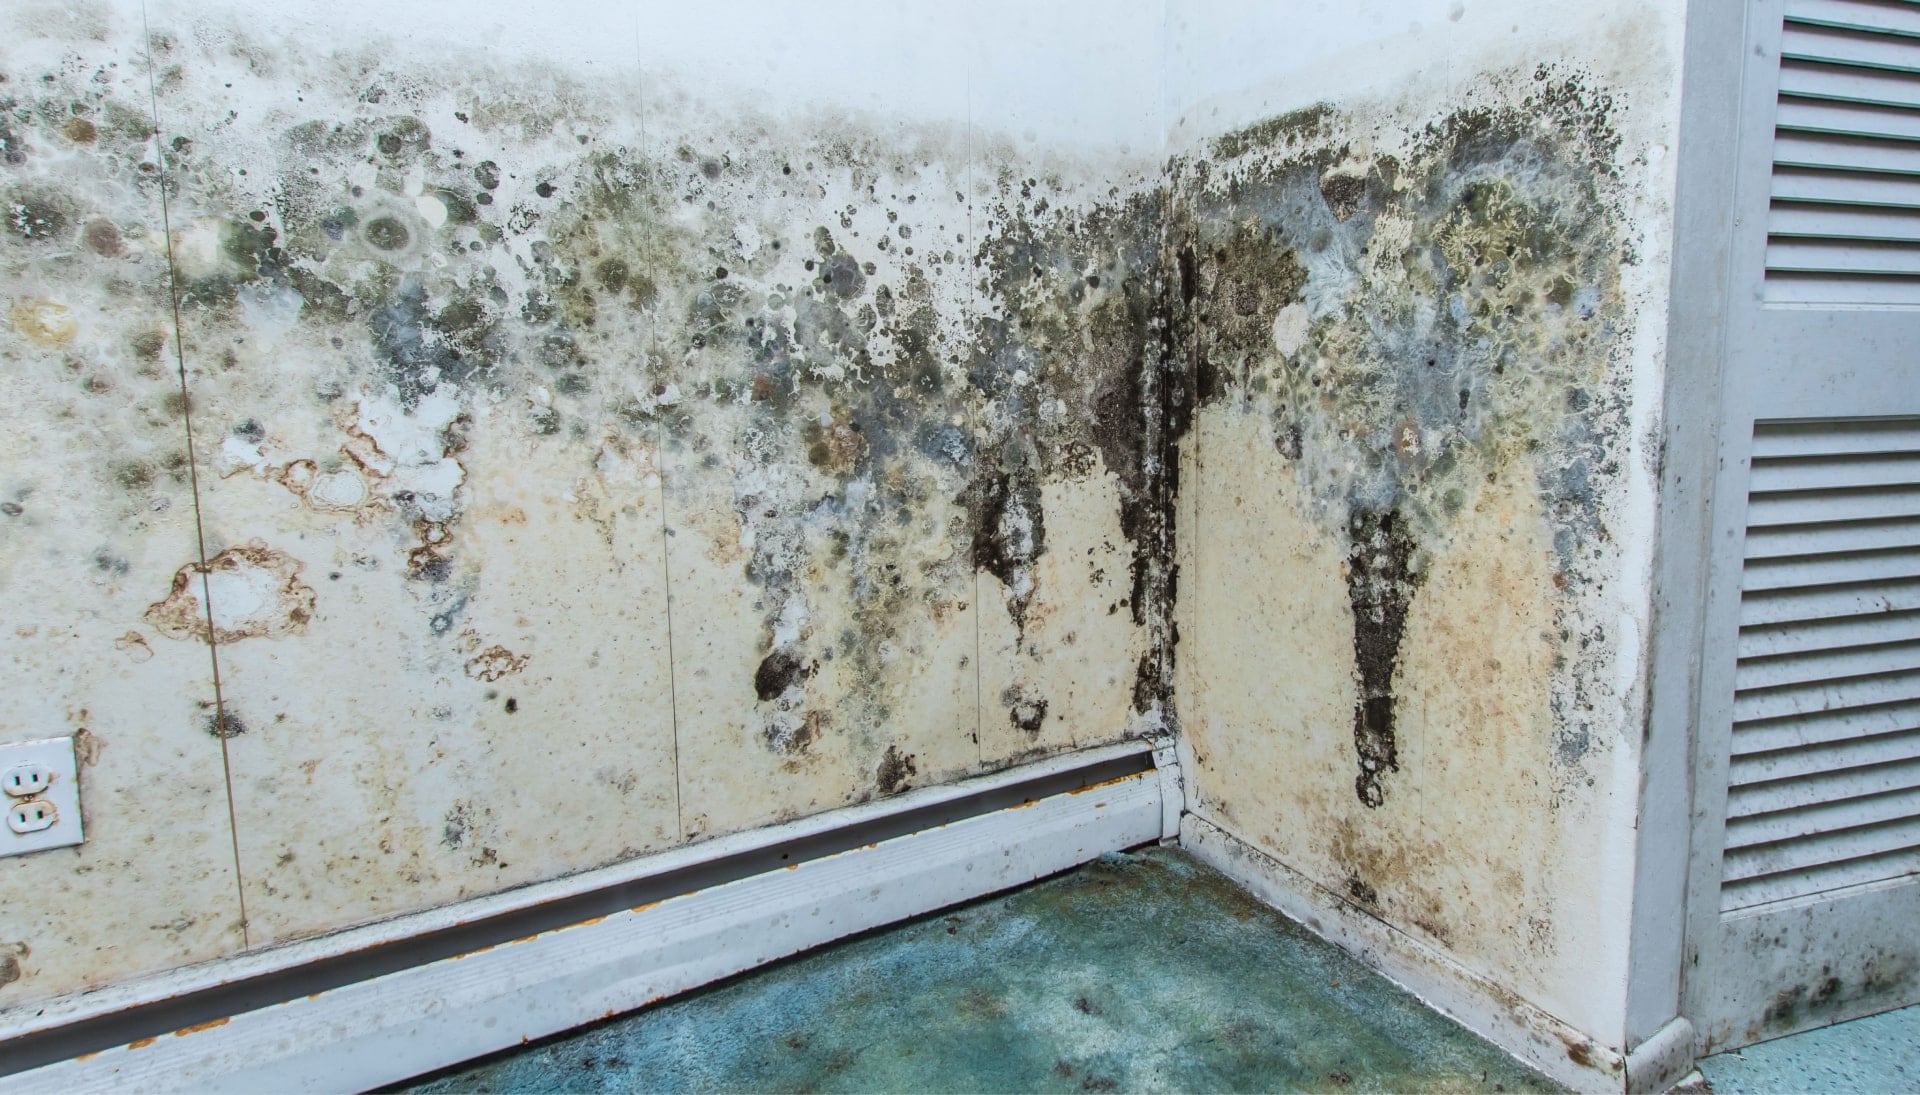 Professional mold removal, odor control, and water damage restoration service in The Villages, Florida.